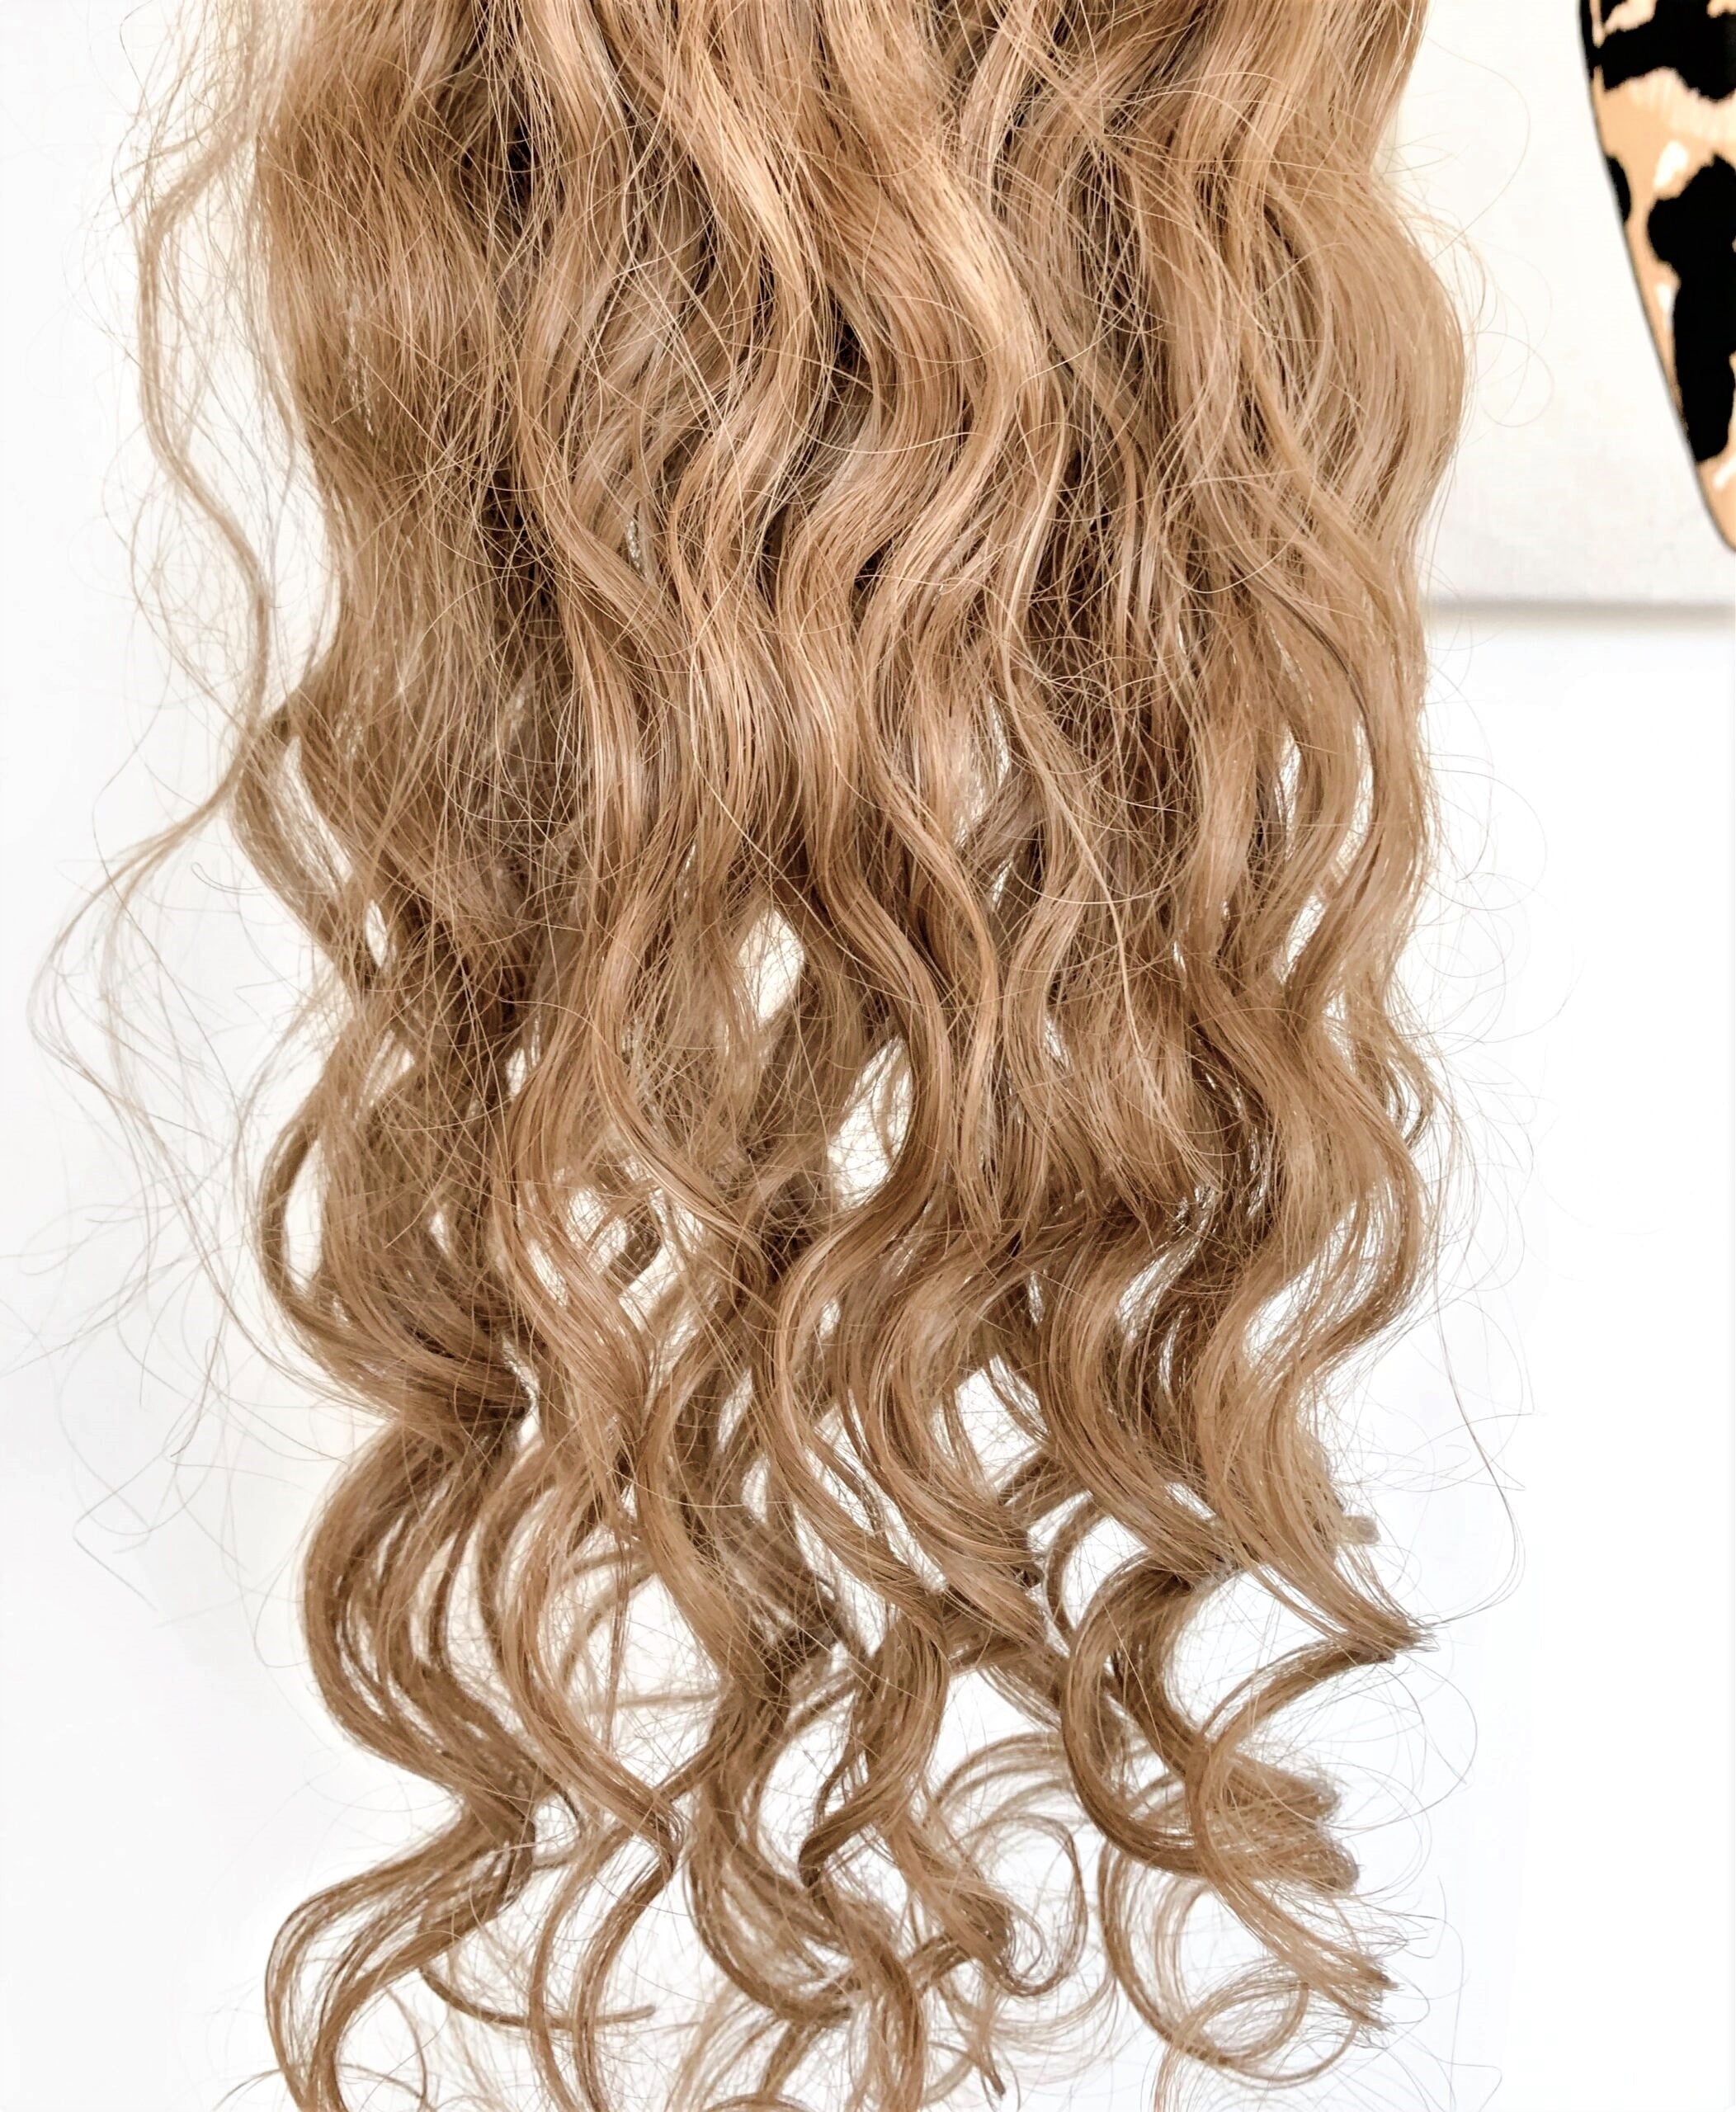 Curly Human Hair Extensions, Wavy Human Hair Extensions